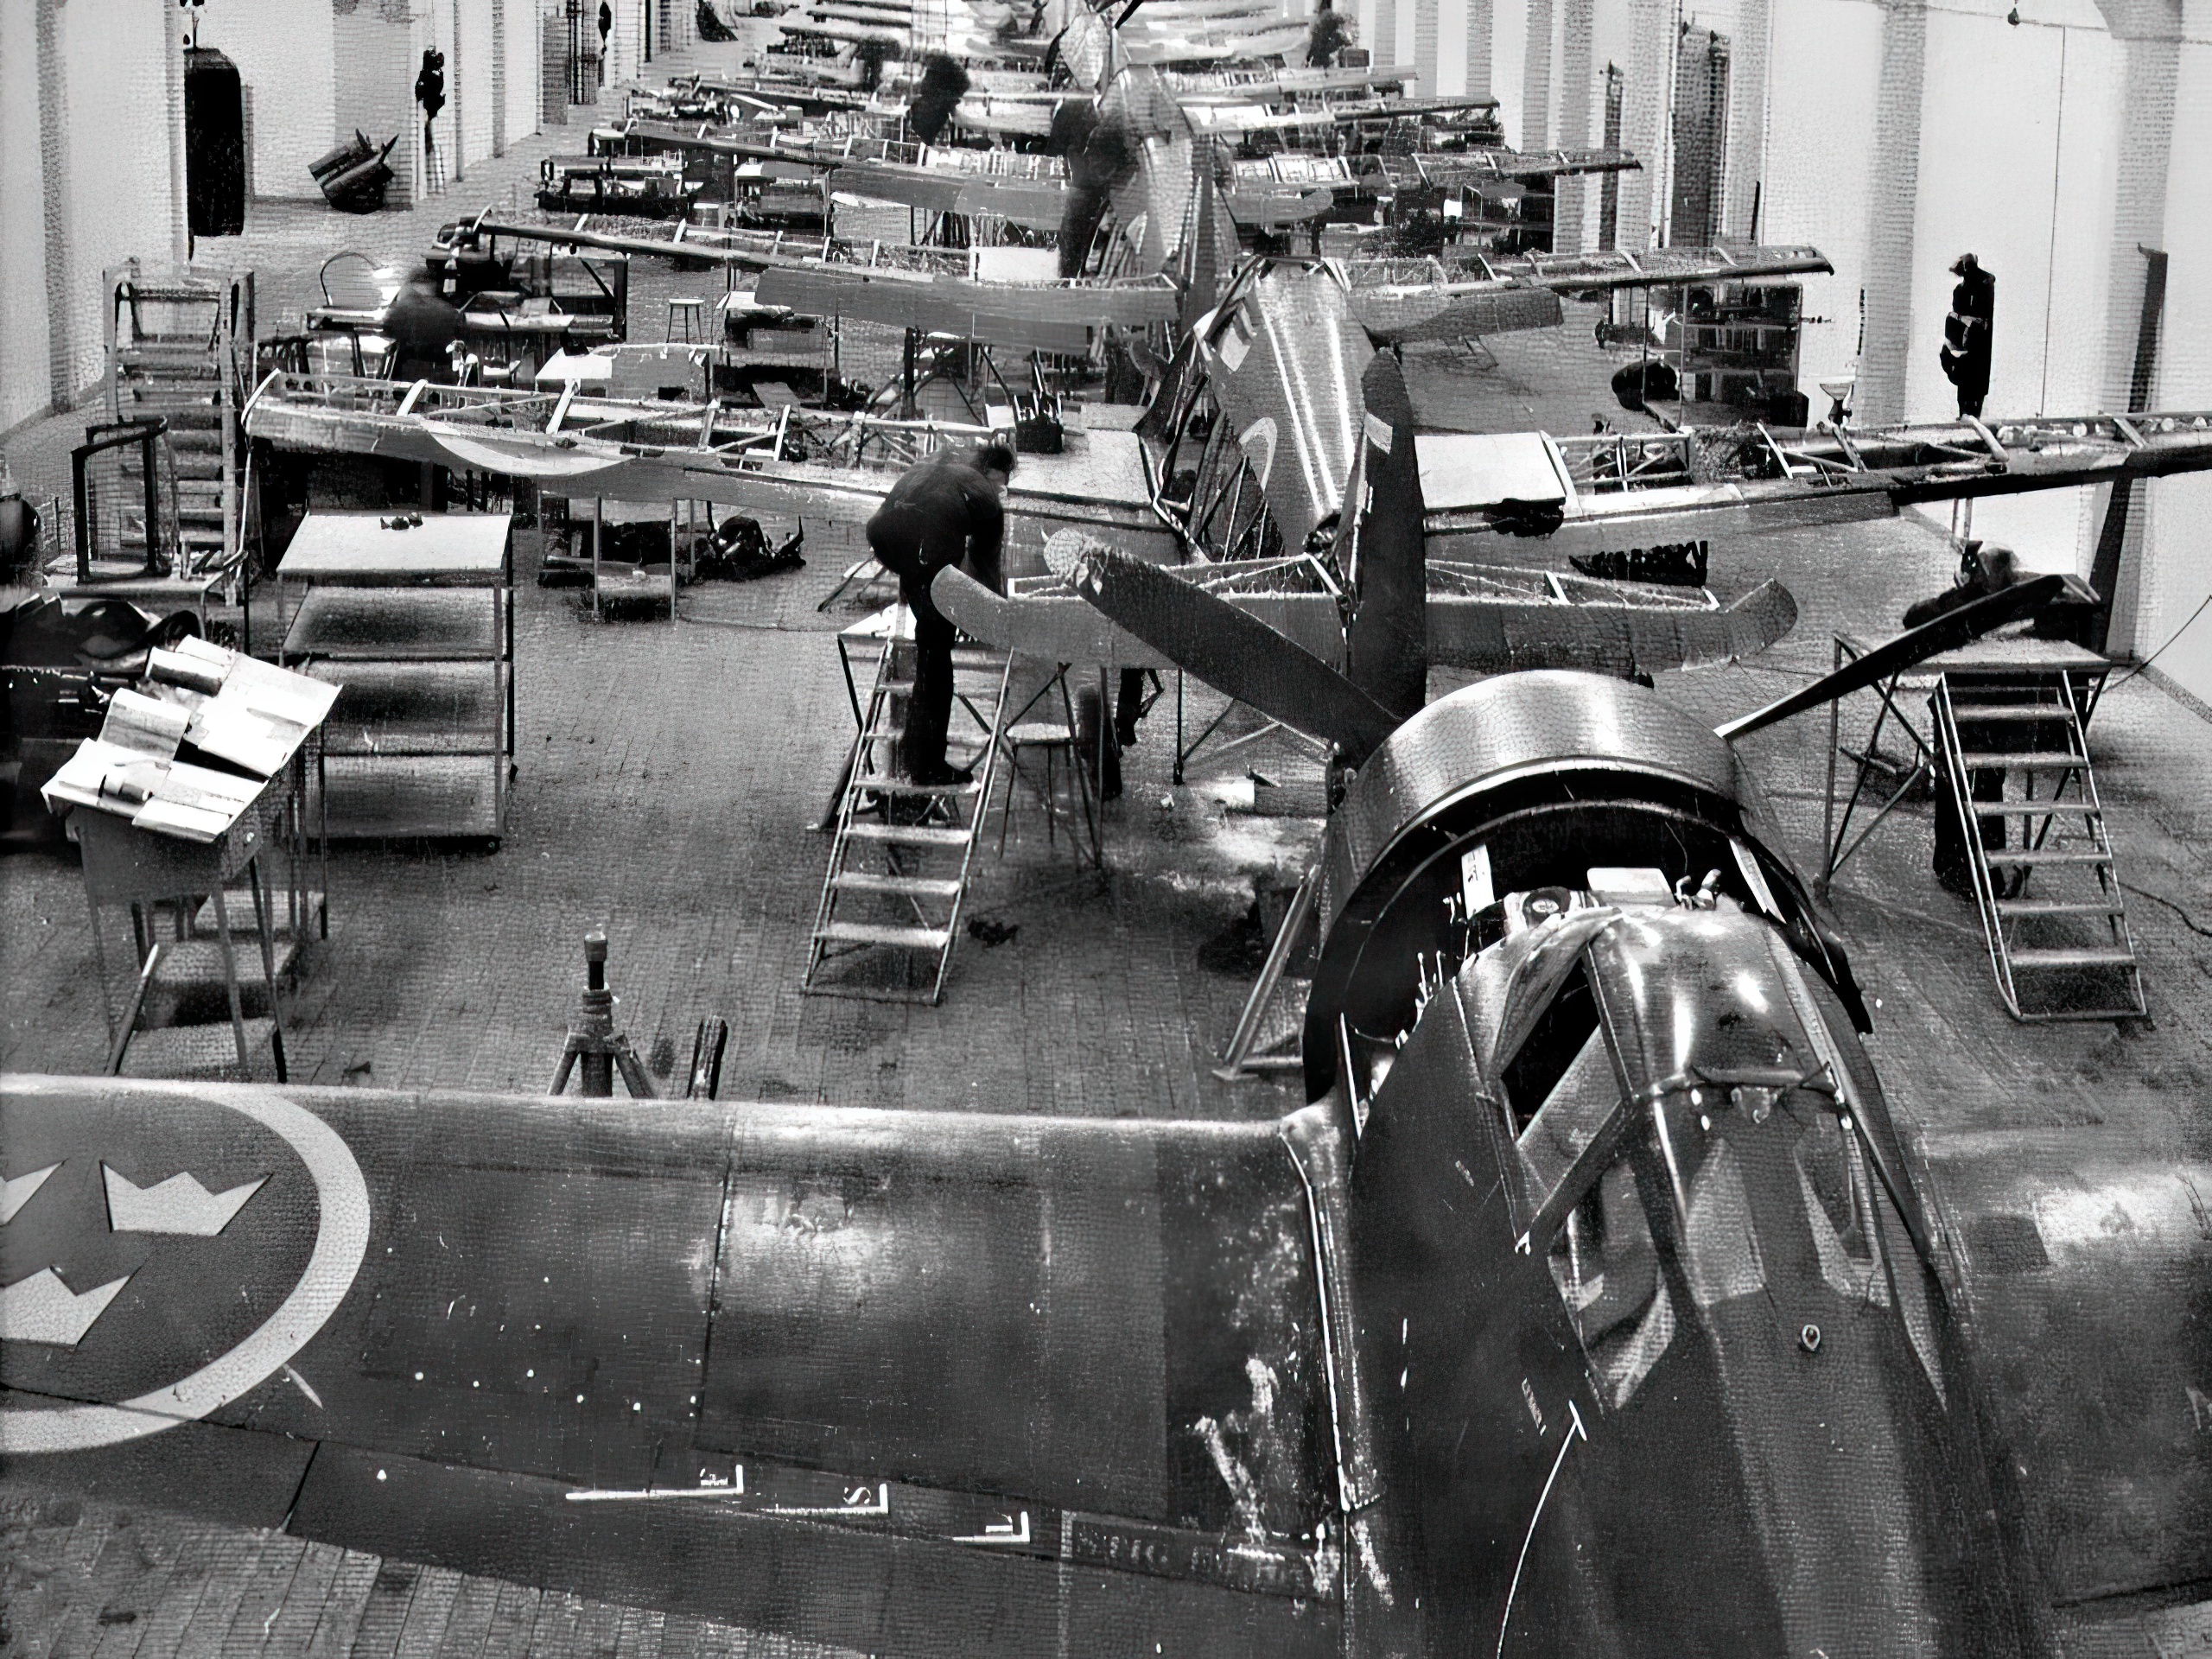 FFVS J 22 undergoing 300 hour maintenance at the Saab factory in Arboga 1947